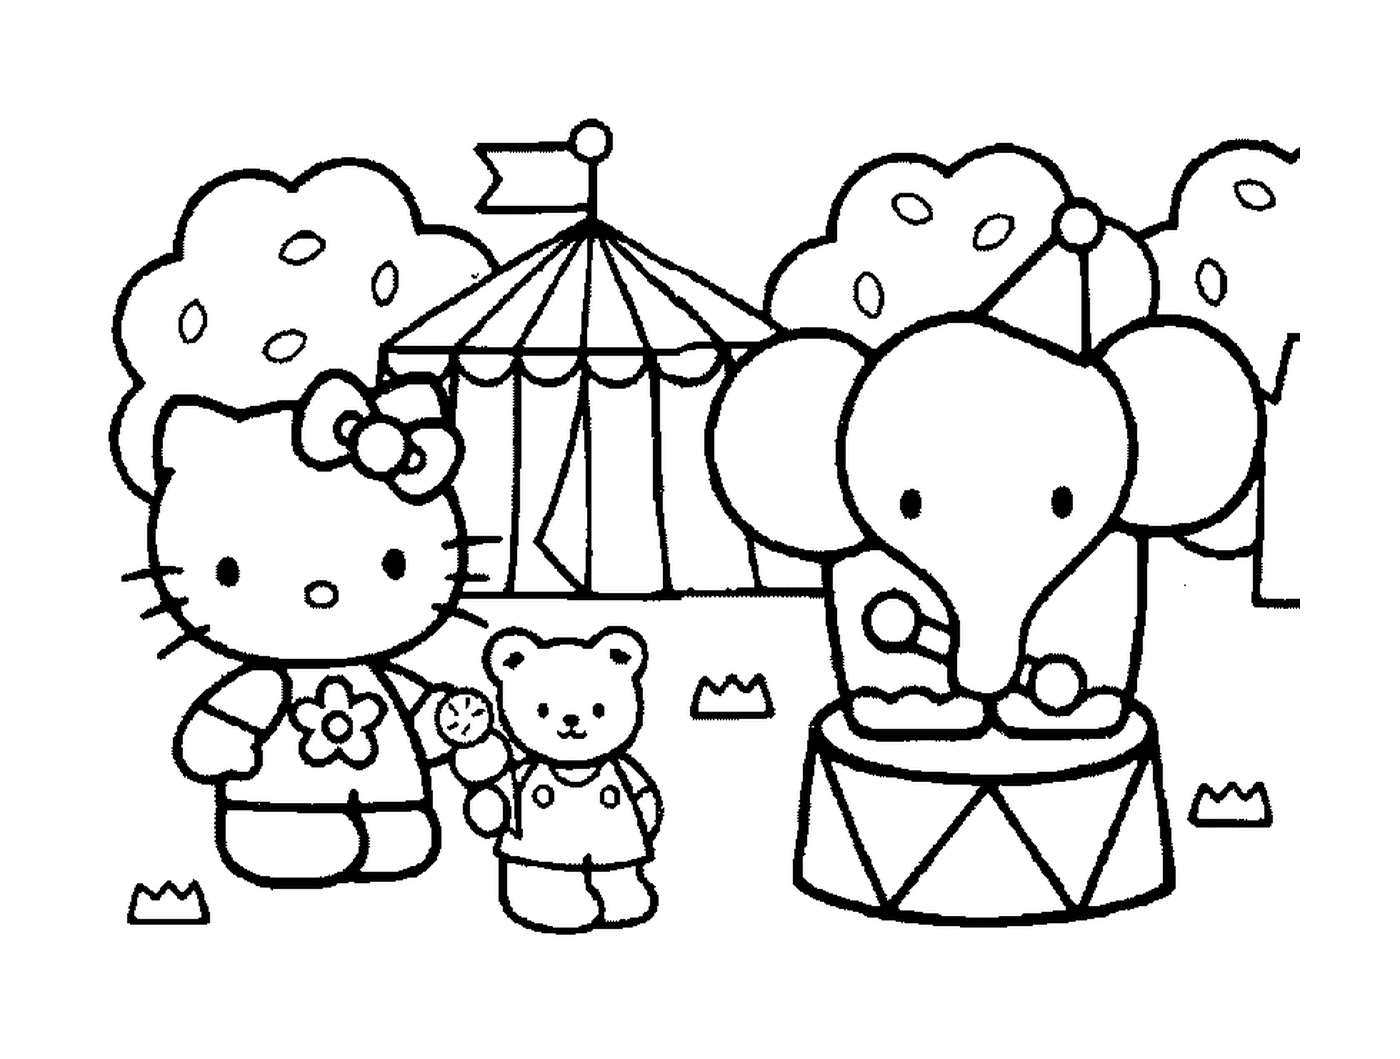  A circus scene with Hello Kitty 